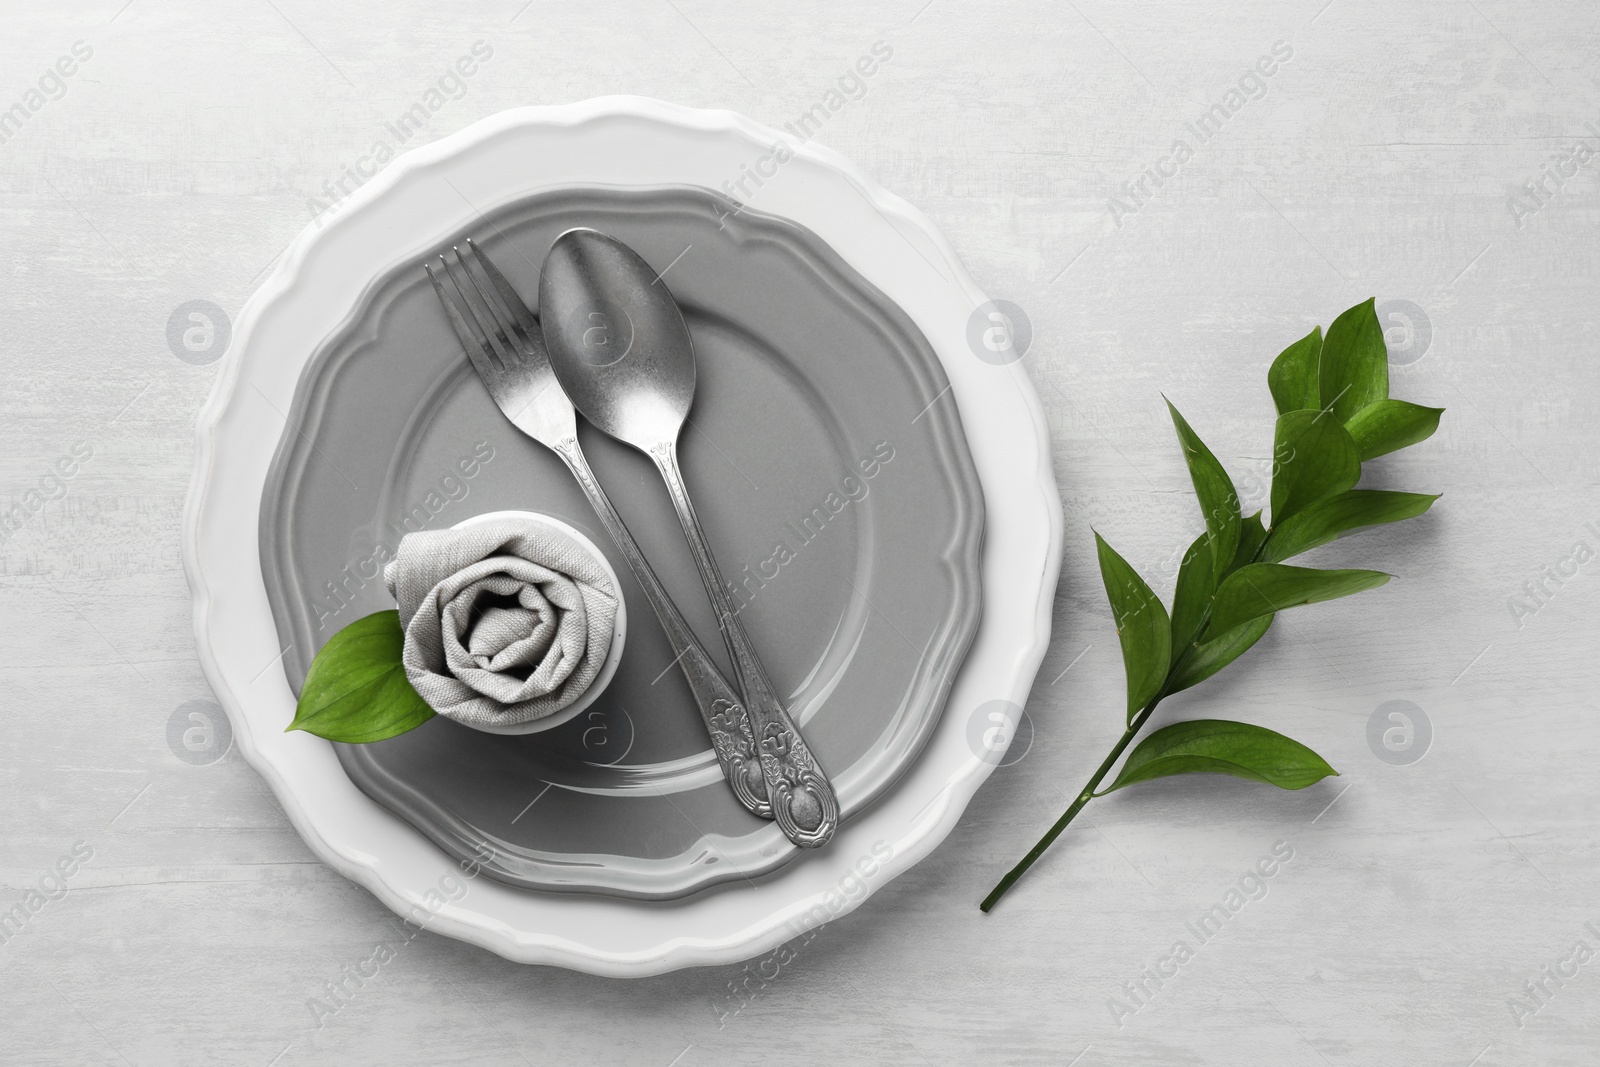 Photo of Stylish setting with cutlery, napkin, branch and plates on light textured table, top view. Space for text